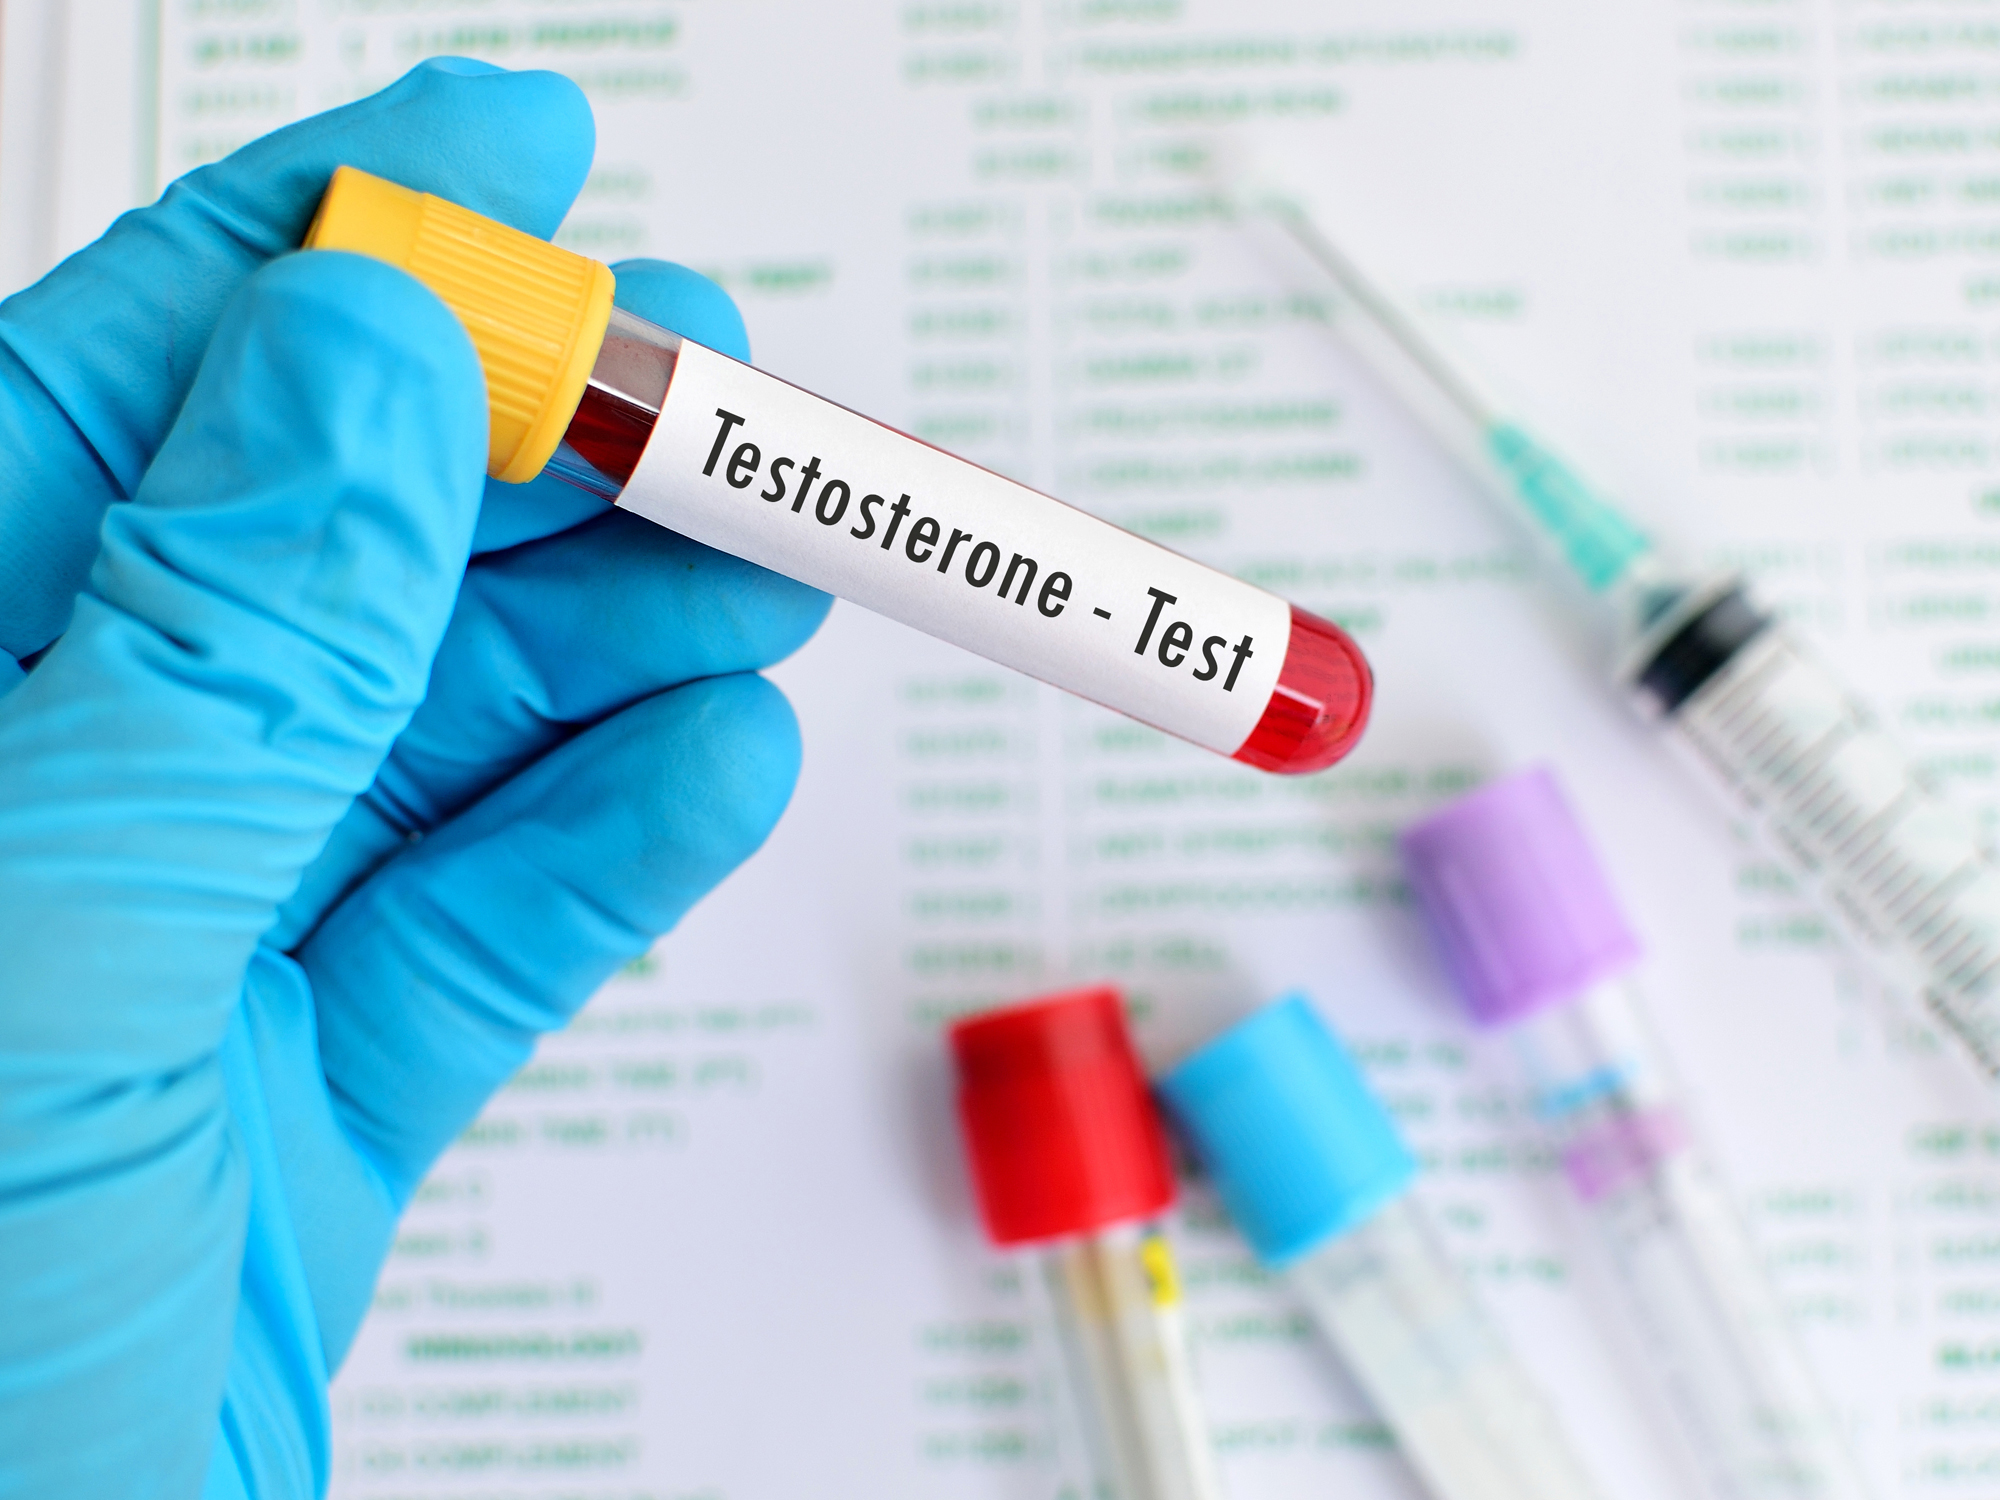 Testosterone levels: What’s normal?